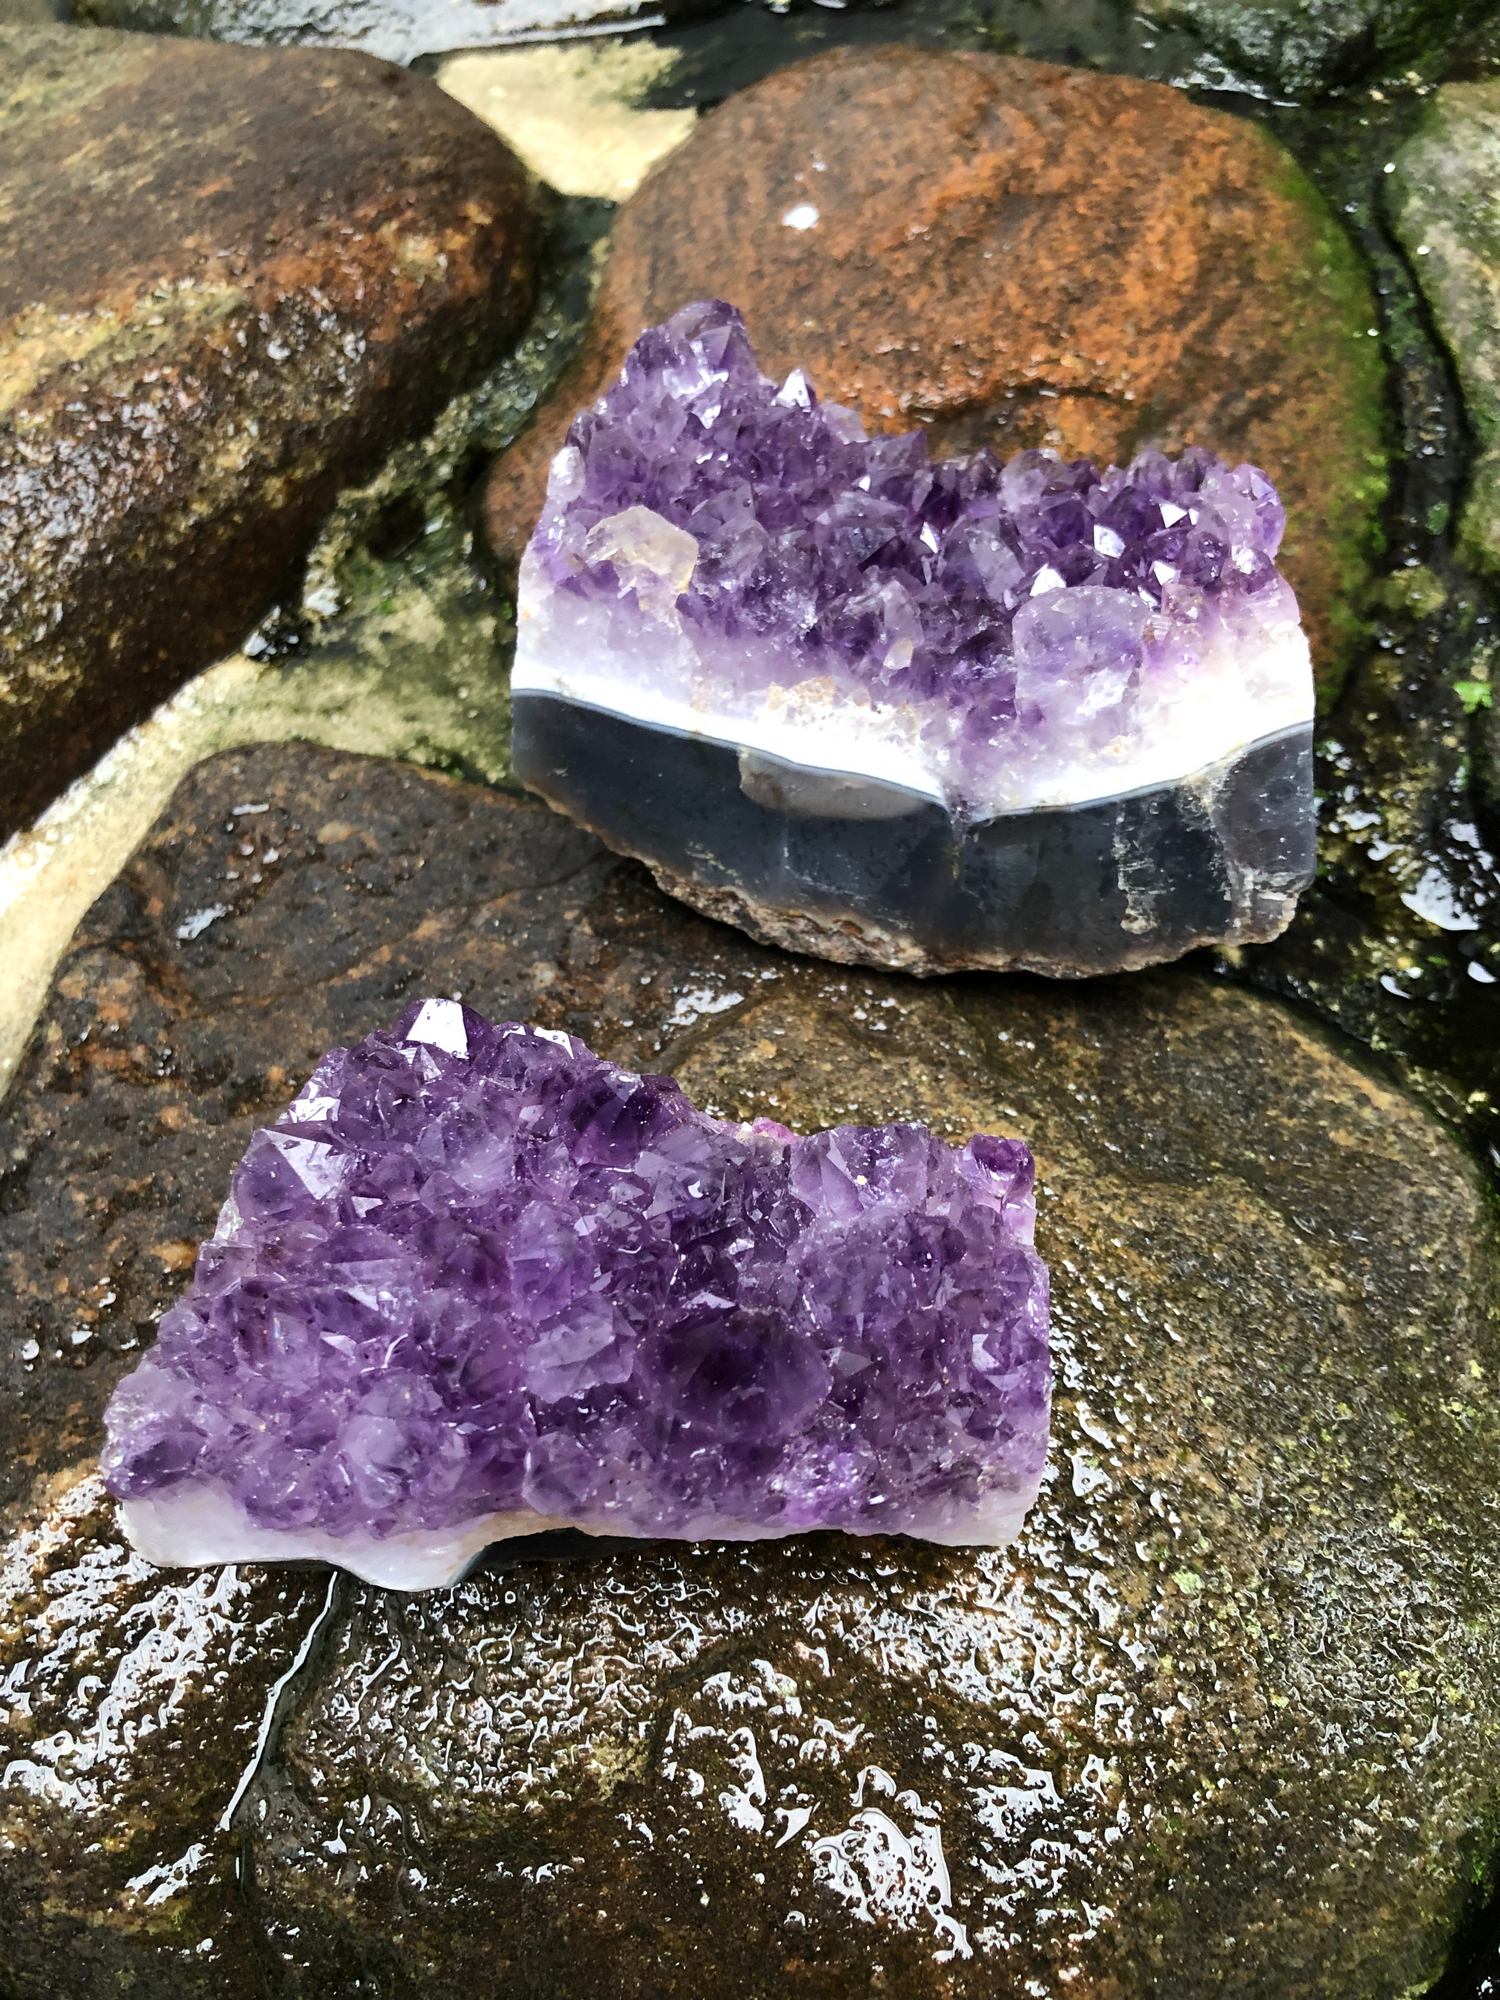 Beautiful Uruguay Amethyst Chunks, High Quality Amethyst, Deep Purple Amethyst, Amethyst Slice, Meditation, Crystal Healing, Home Accents